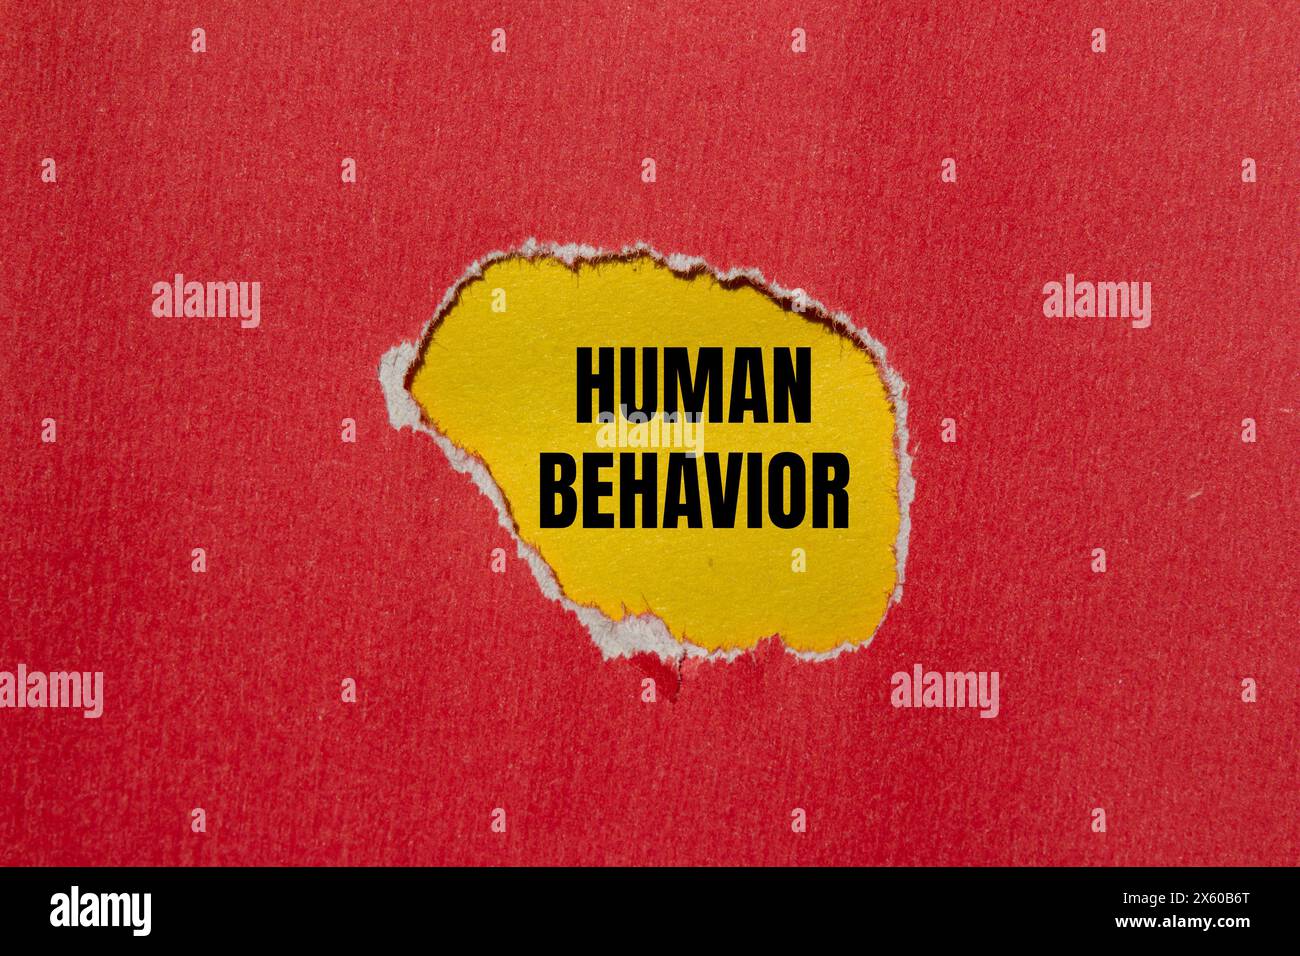 Human behavior words written on ripped red paper with yellow background. Conceptual human behavior symbol. Copy space. Stock Photo